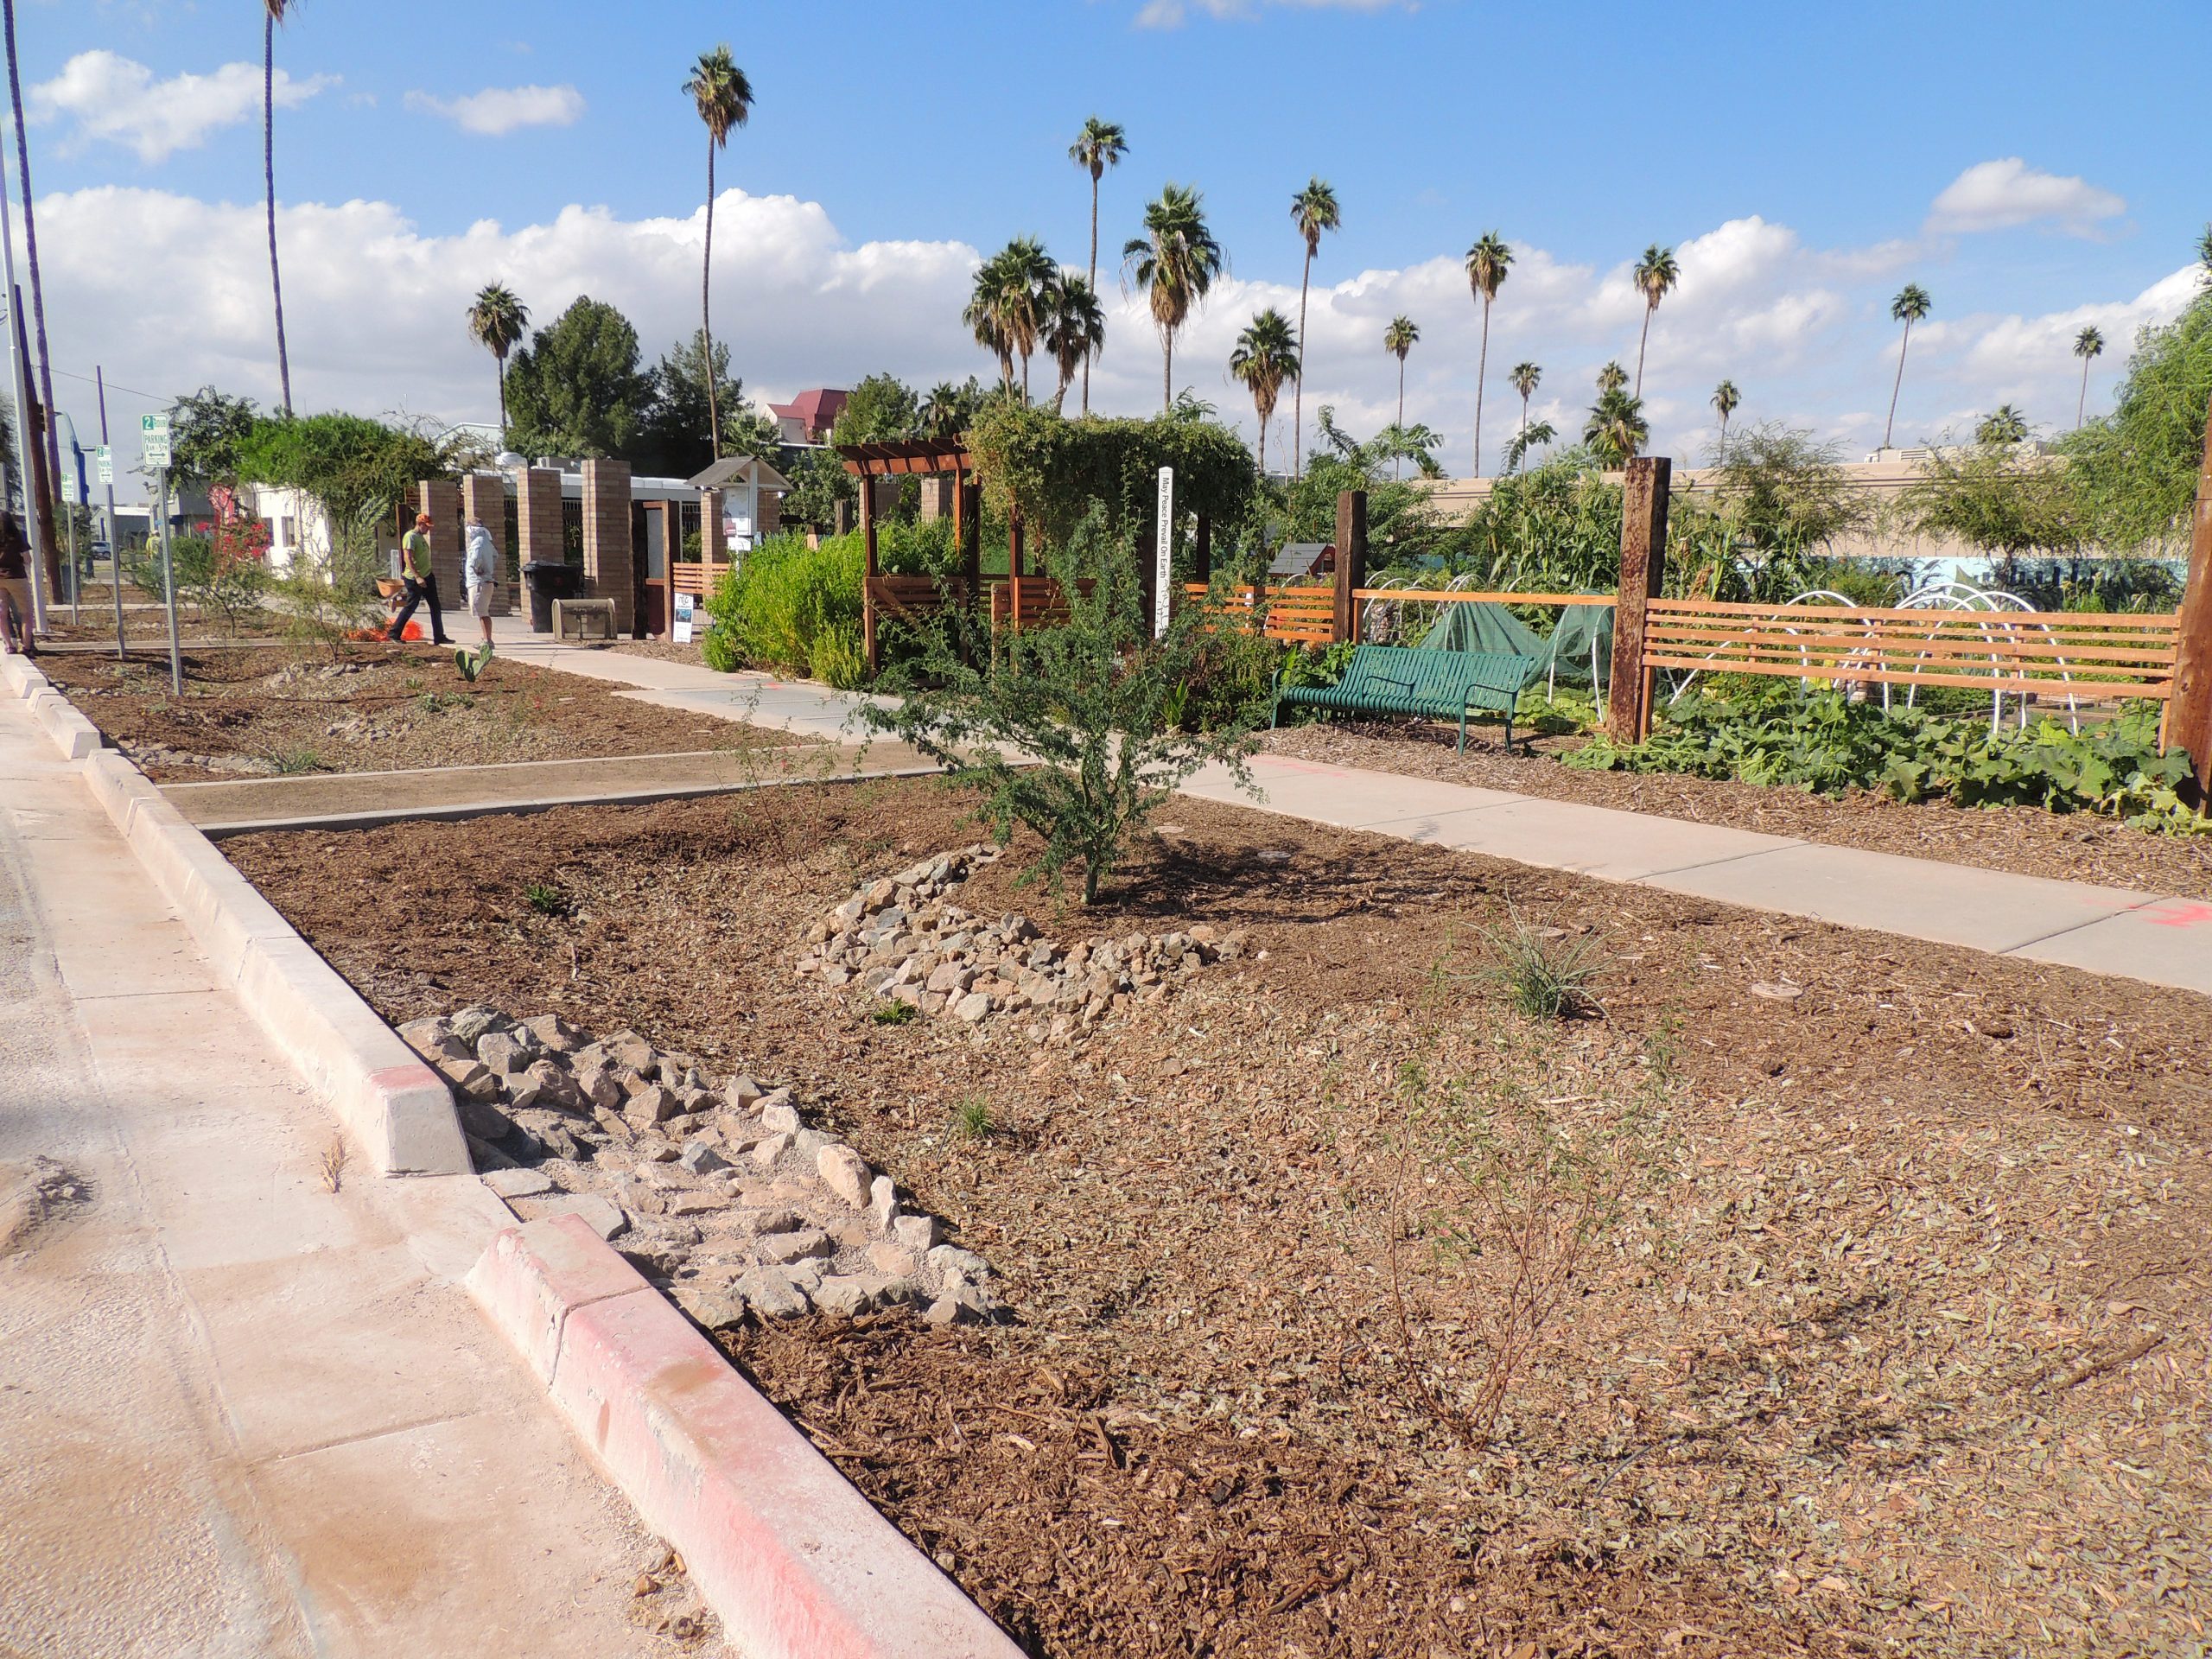 The completed project will allow the City of Mesa to evaluate low impact development practices.